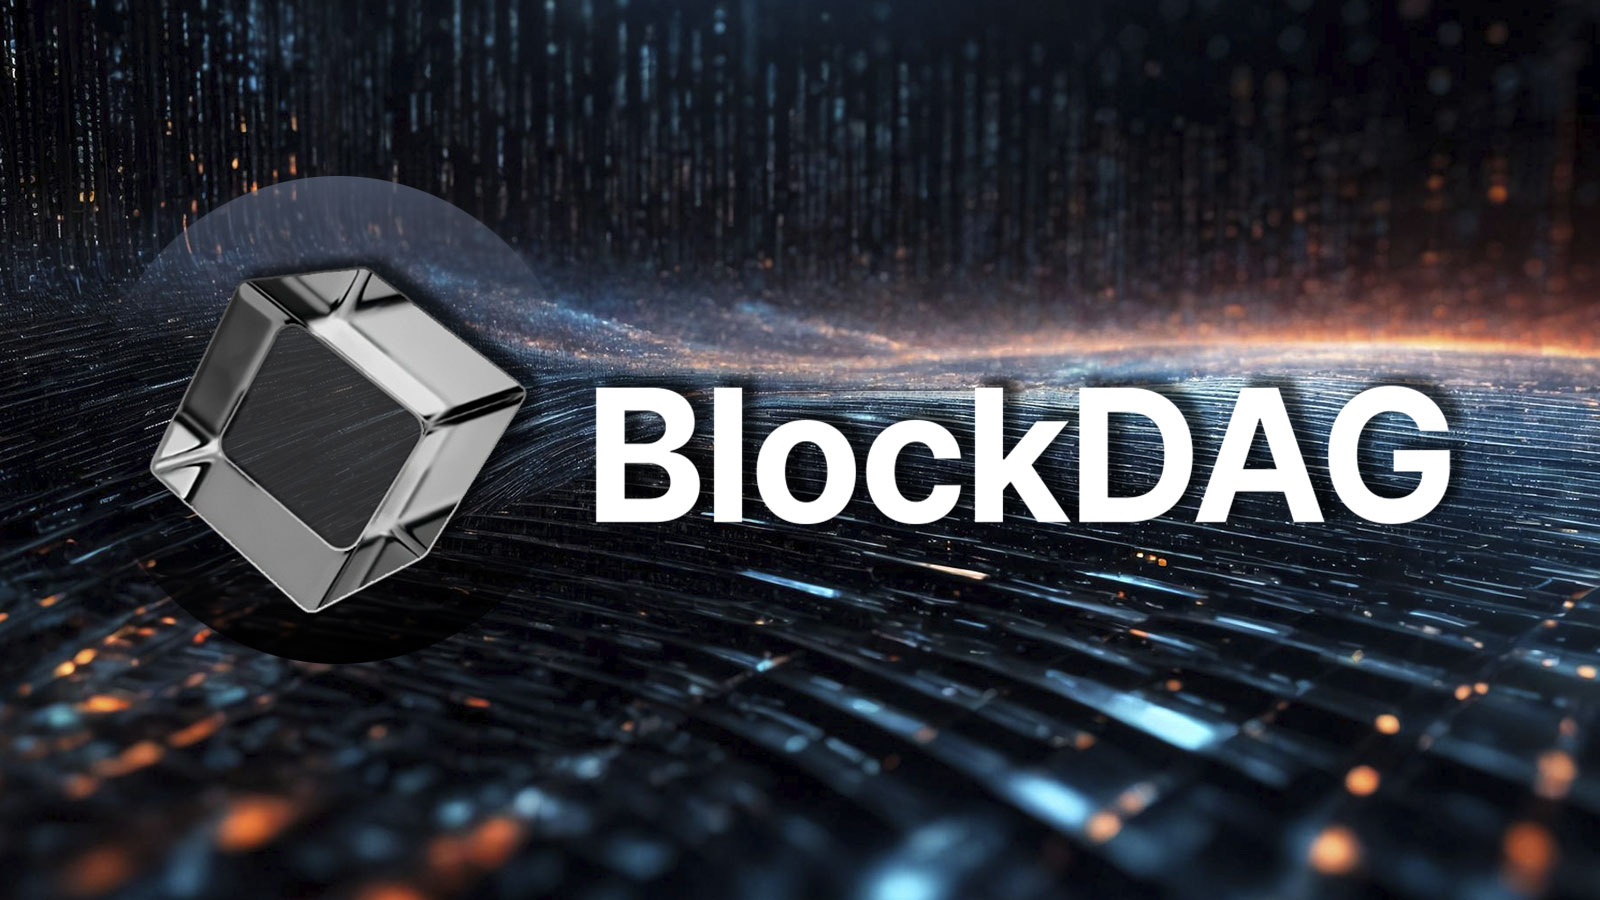 BlockDAG (BDAG) Novel Asset Sale Might be Spotlighted in May as XRP and Cardano (ADA) Major Altcoins Recovering